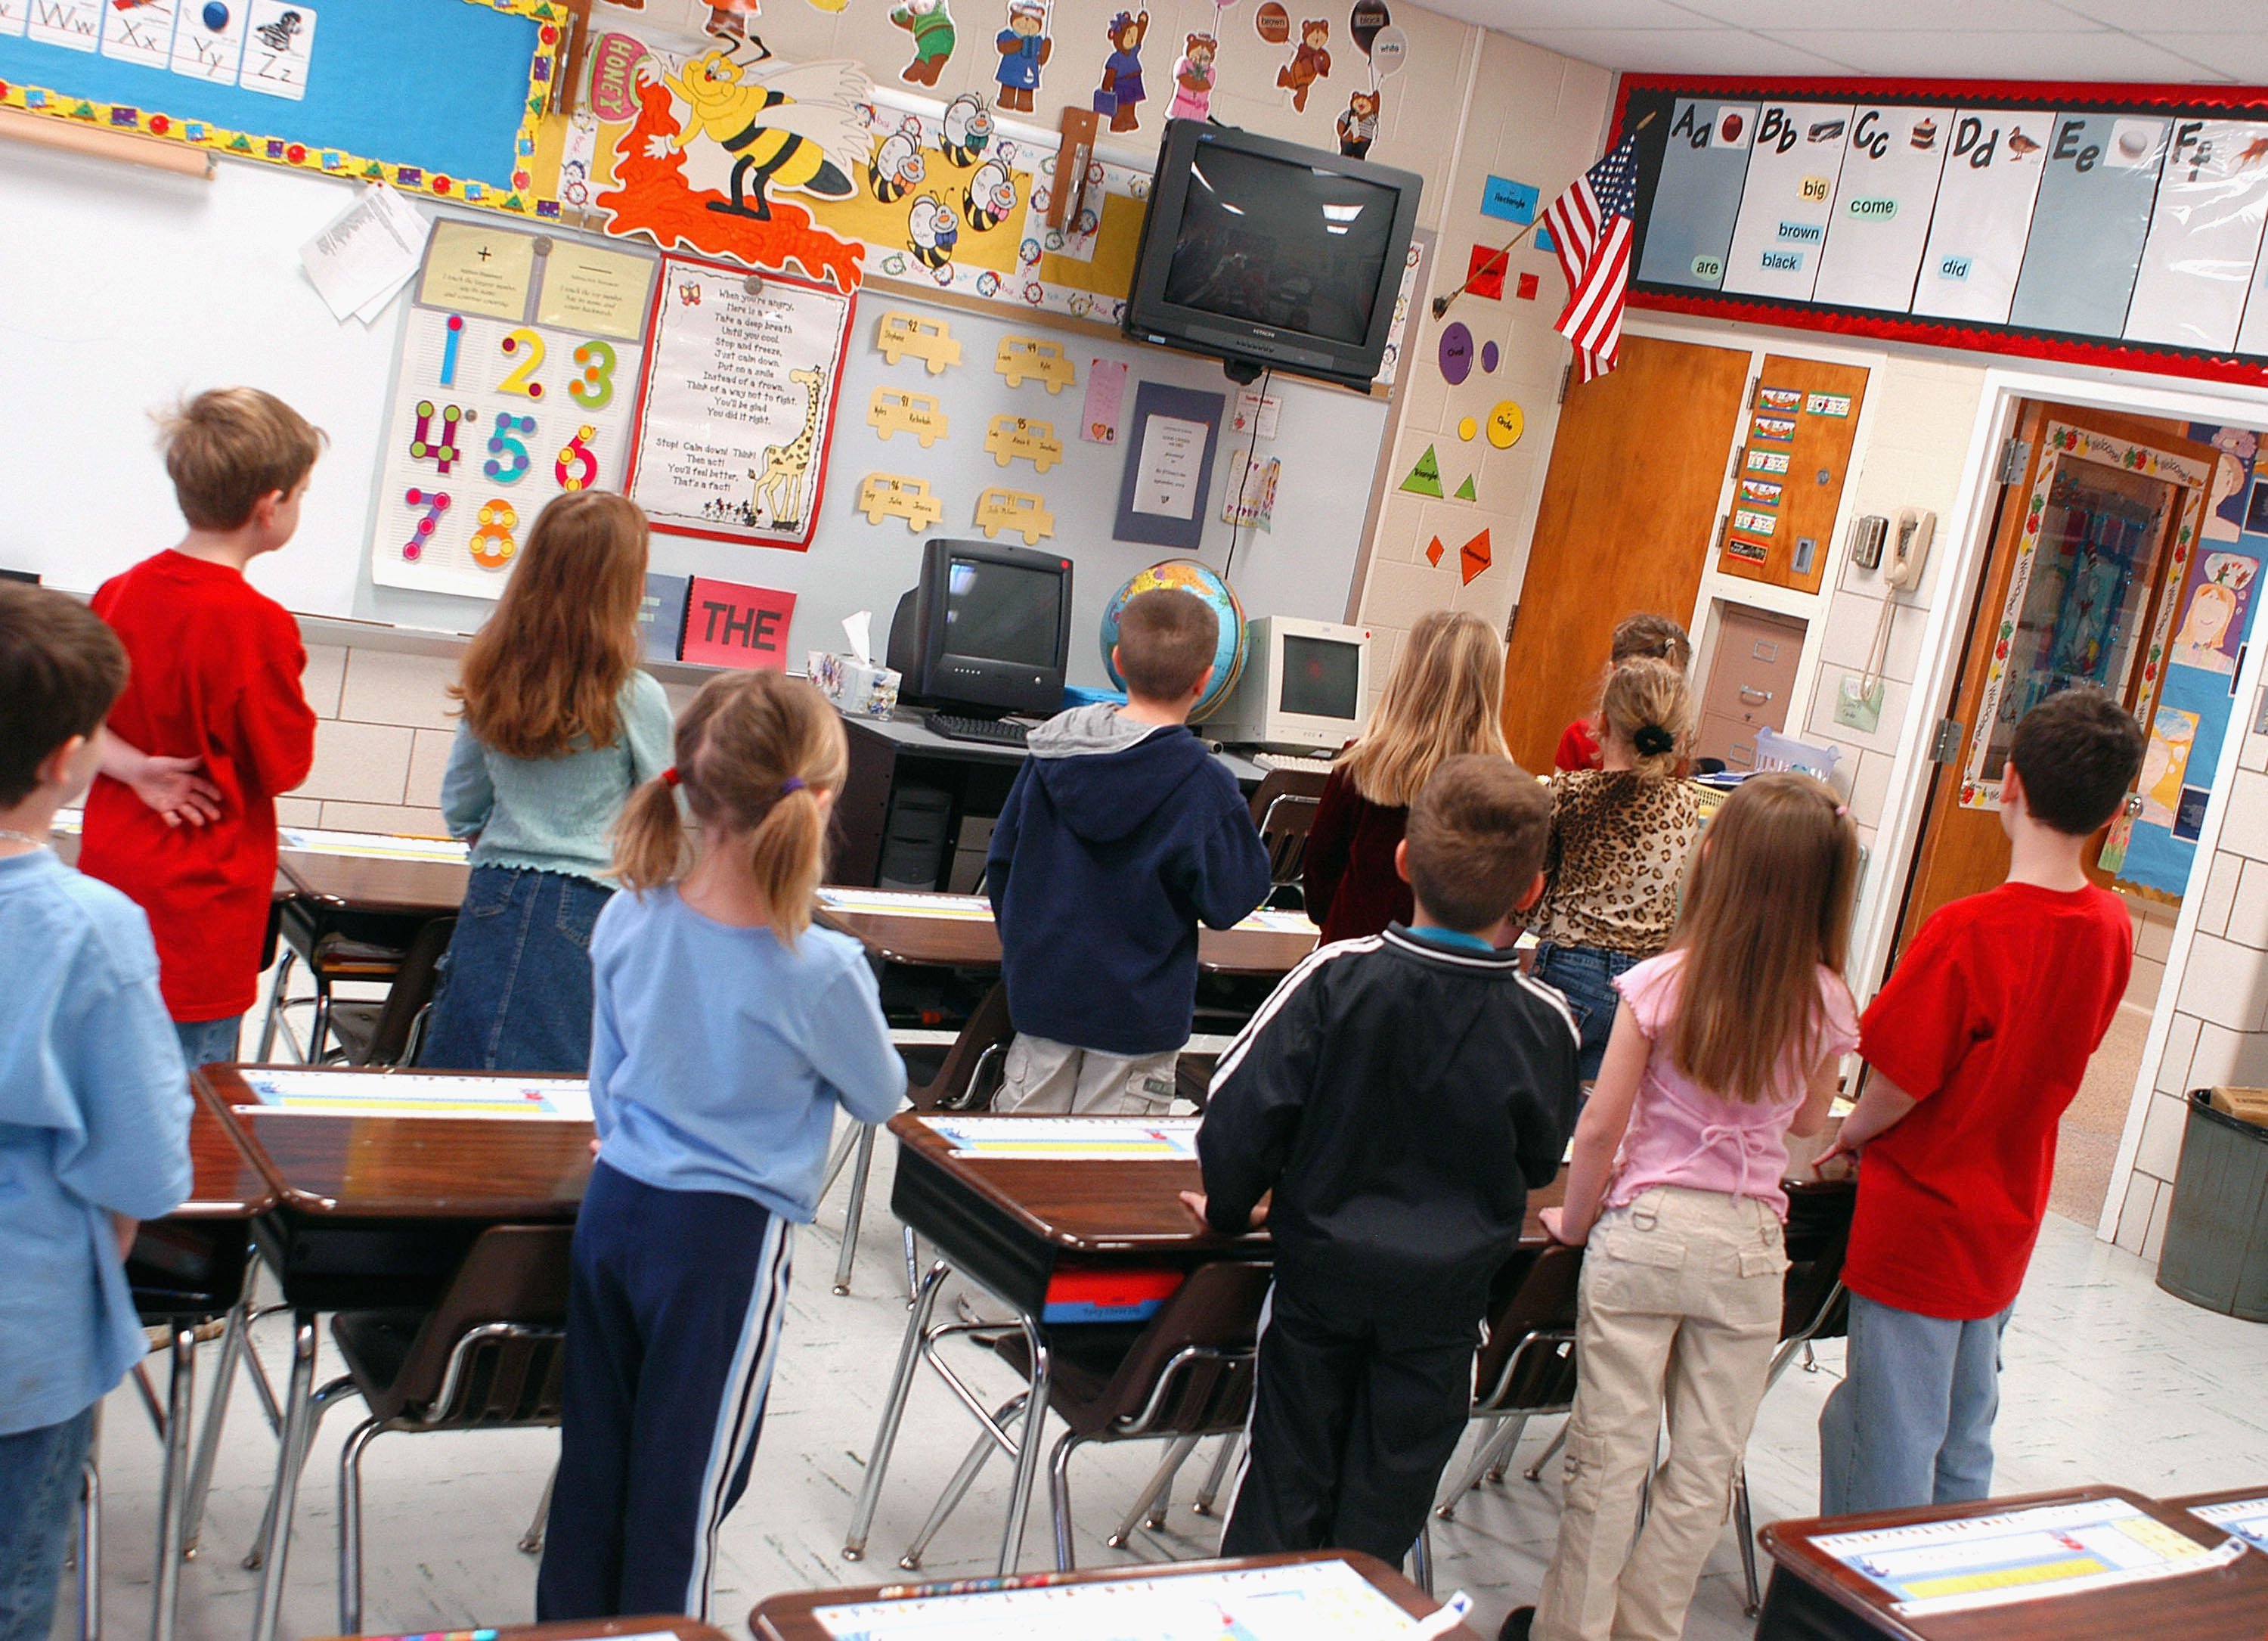 WARMINSTER, PA - MARCH 24: First graders at Longstreth Elementary School pledge allegiance to the flag March 24, 2004 in Warminster, Pennsylvania. An atheist parent, Michael Newdow, of Sacramento, California is scheduled to be heard by the Supreme Court today to defend his position that the "Under God" in the Pledge of Allegiance is unconstitutional. If the Supreme Court upholds and expands their original ruling, which affected western states, all U.S. children will be affected. (Photo by William Thomas Cain/Getty Images)